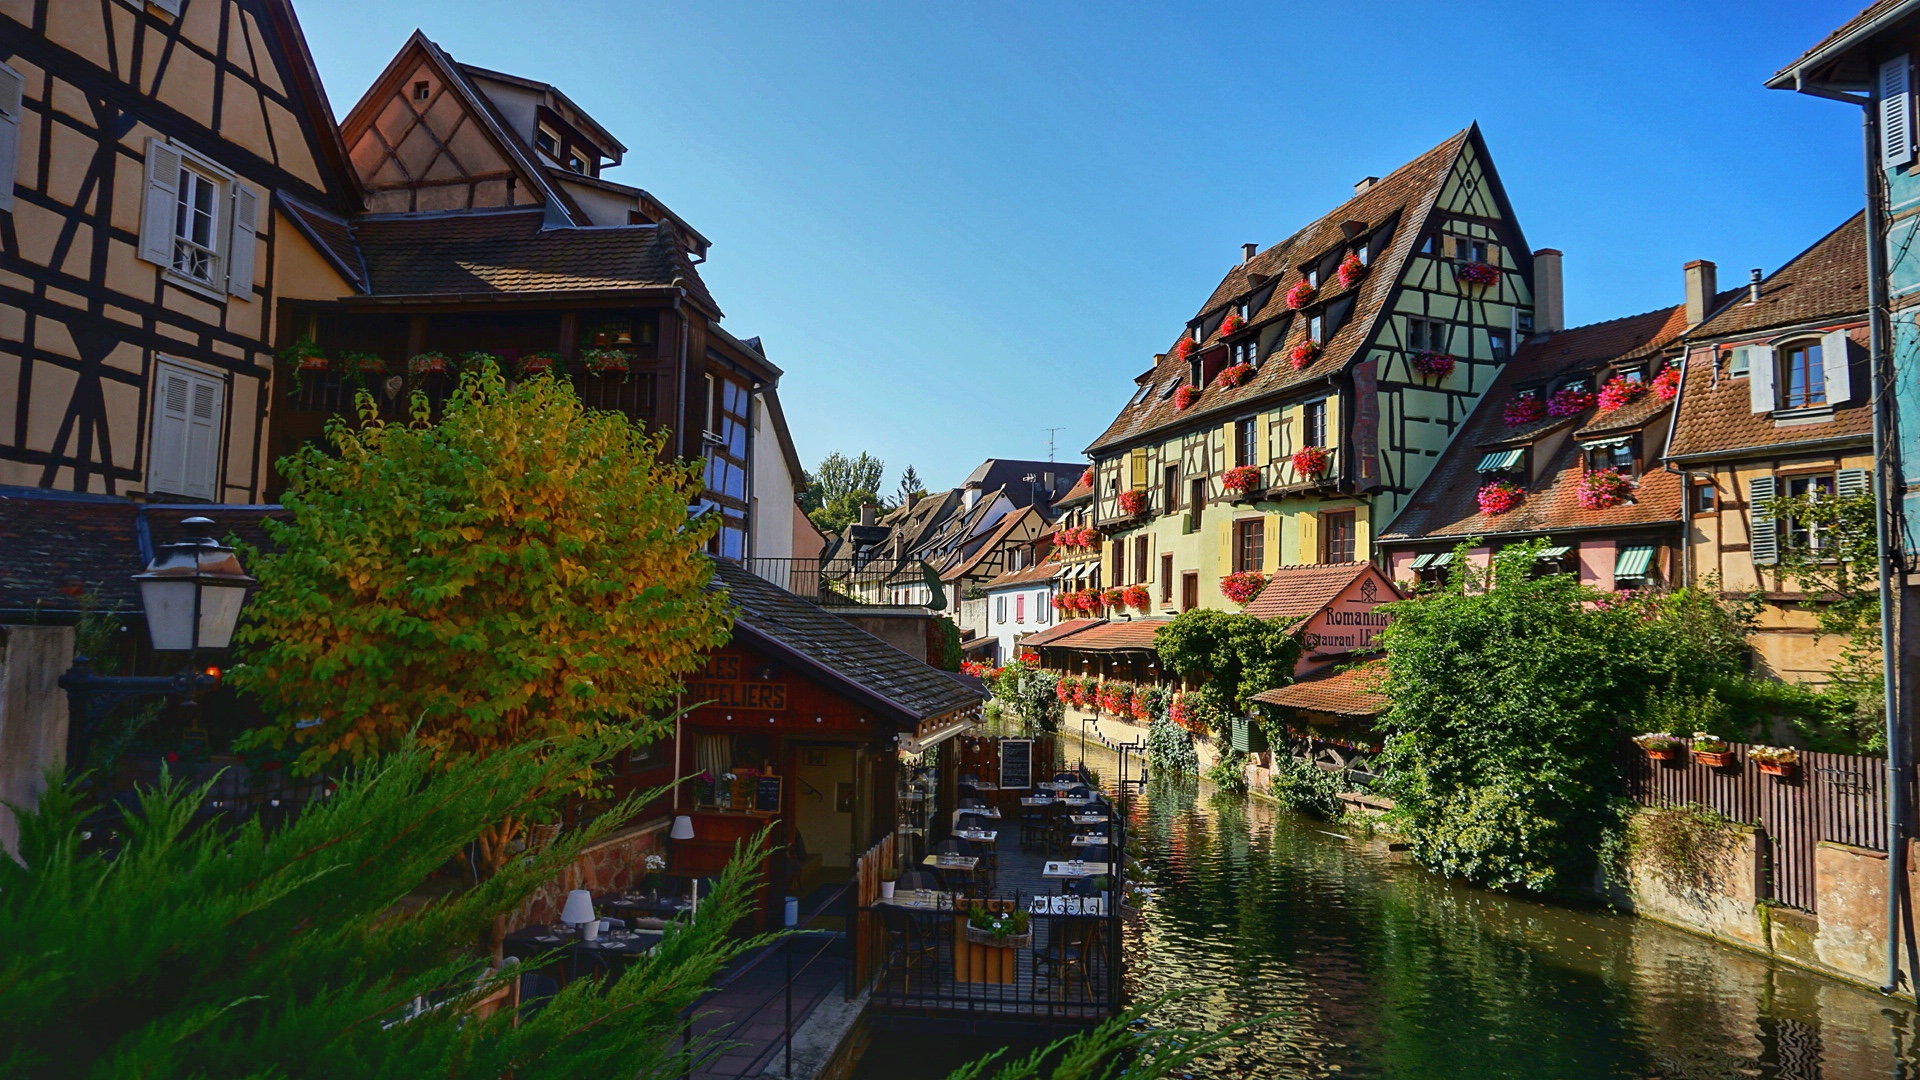 Top fairy tale villages worth visiting in Alsace